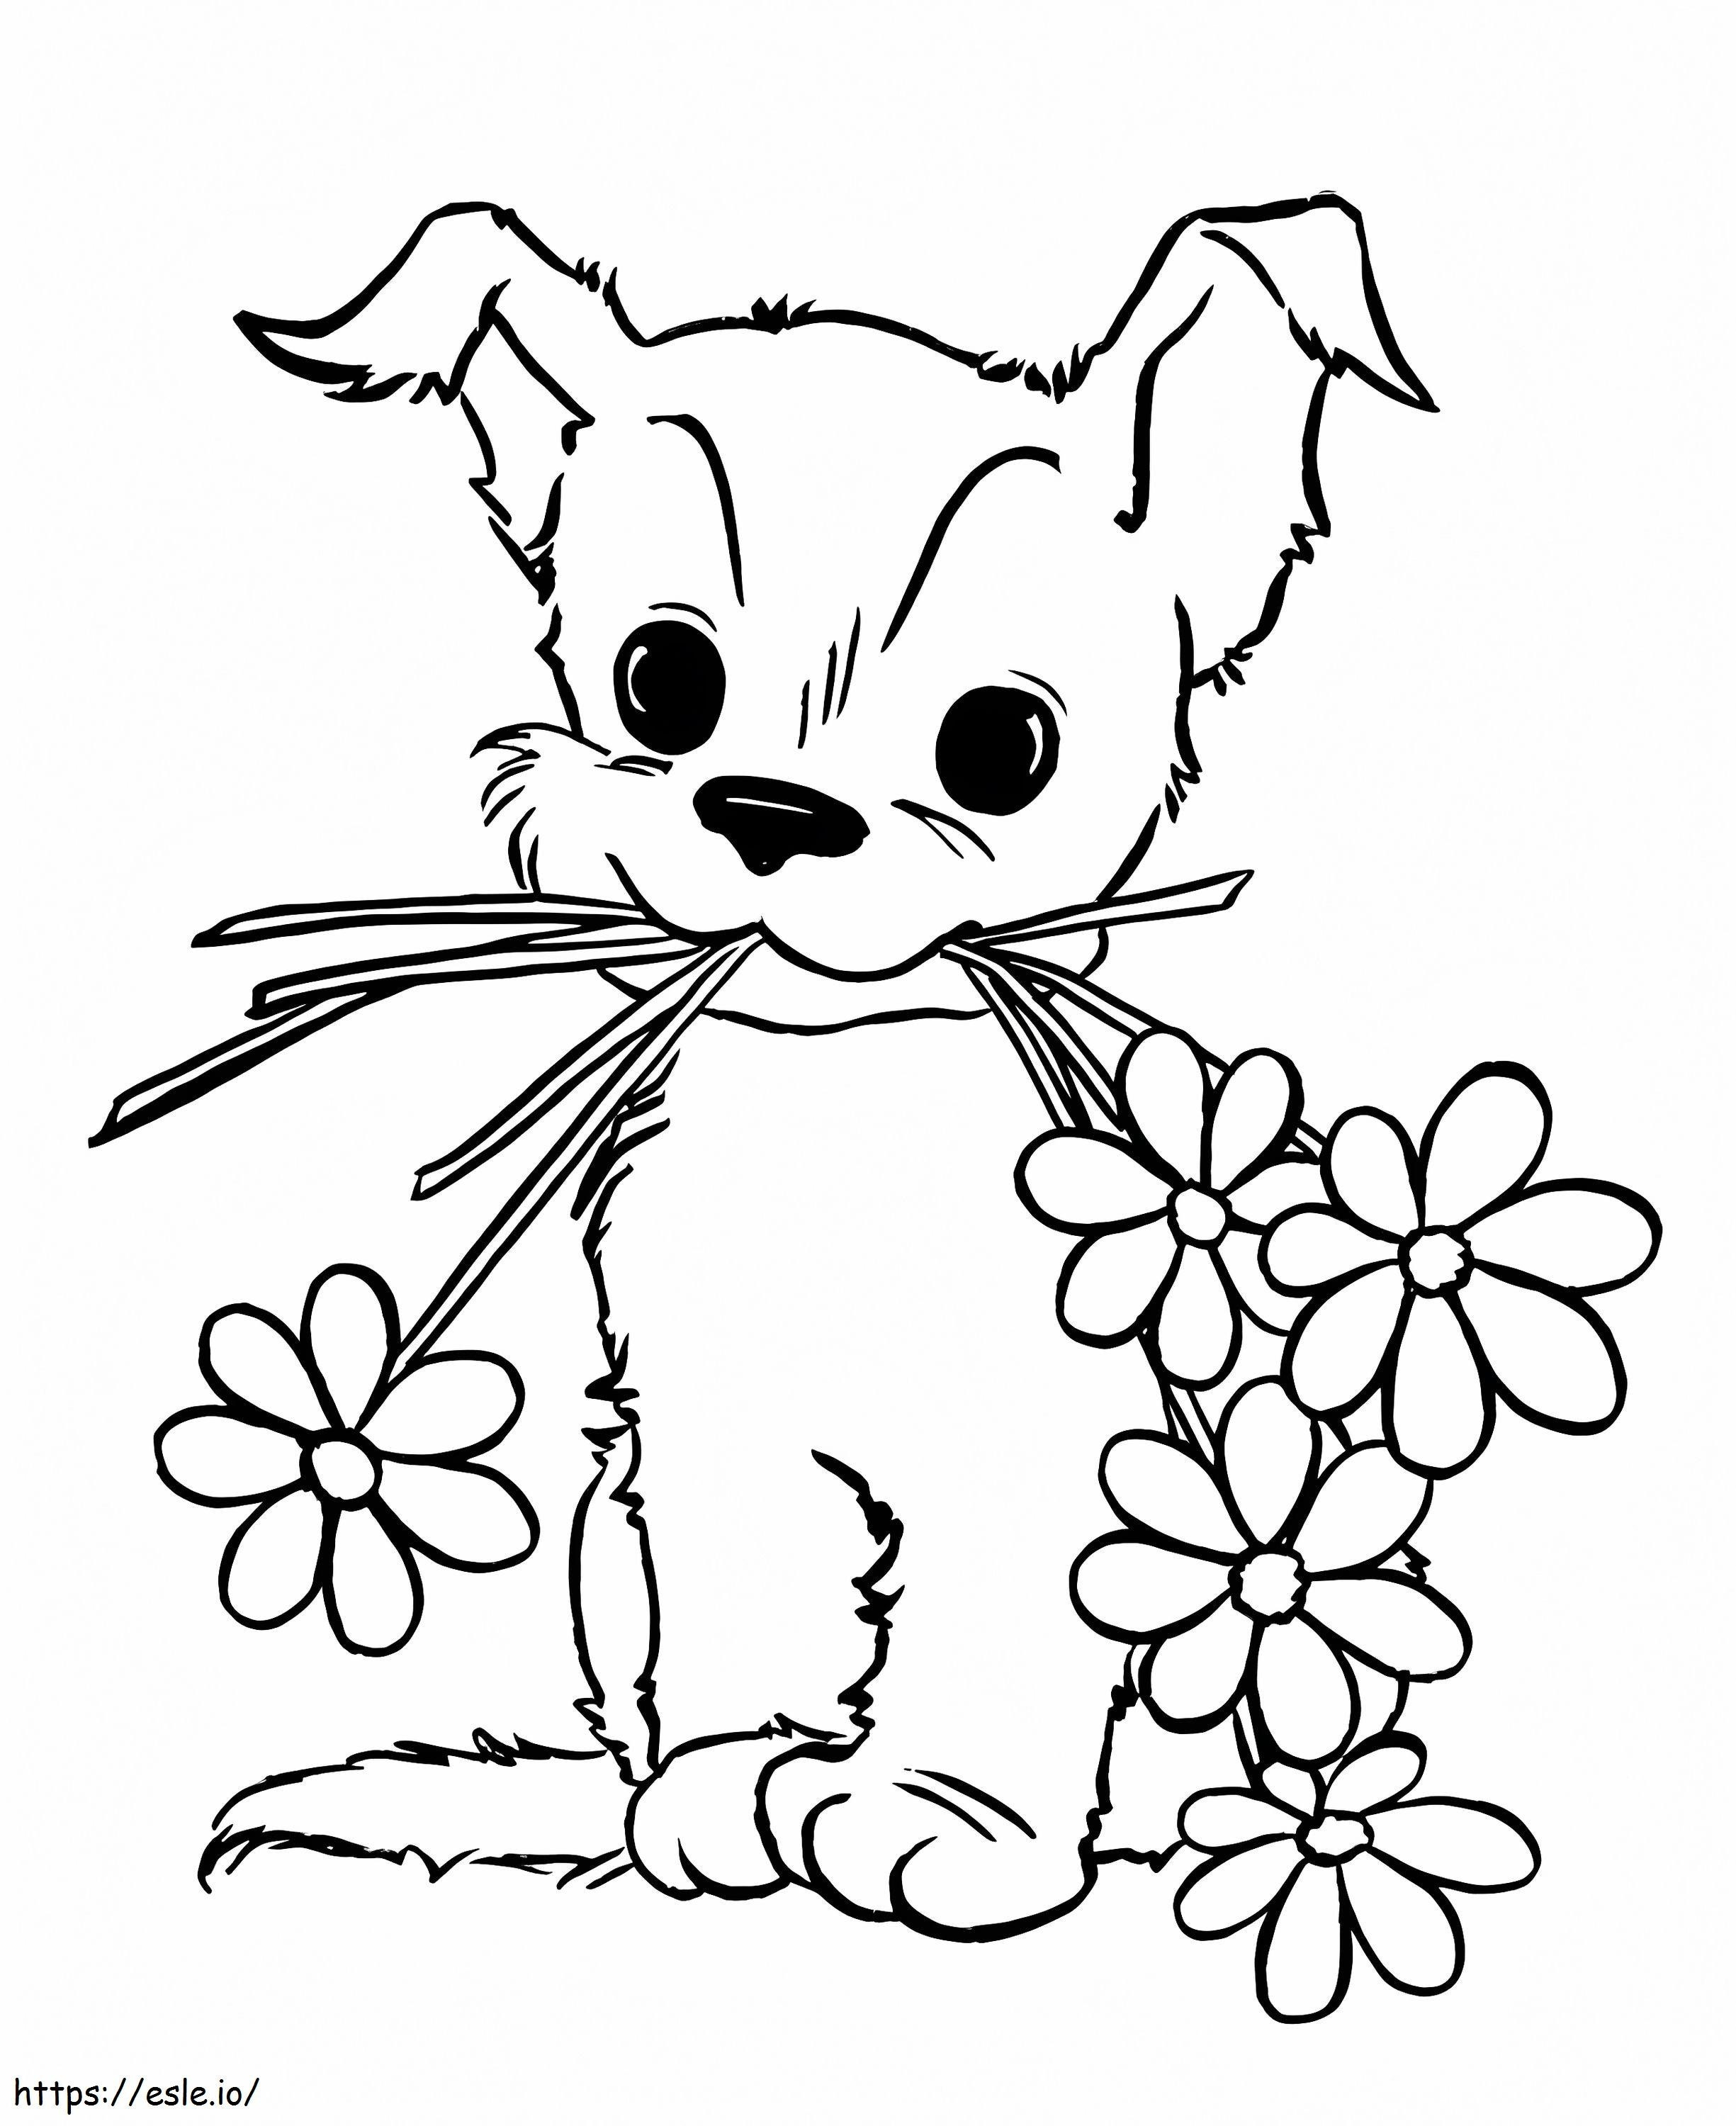 Puppy With Flowers coloring page